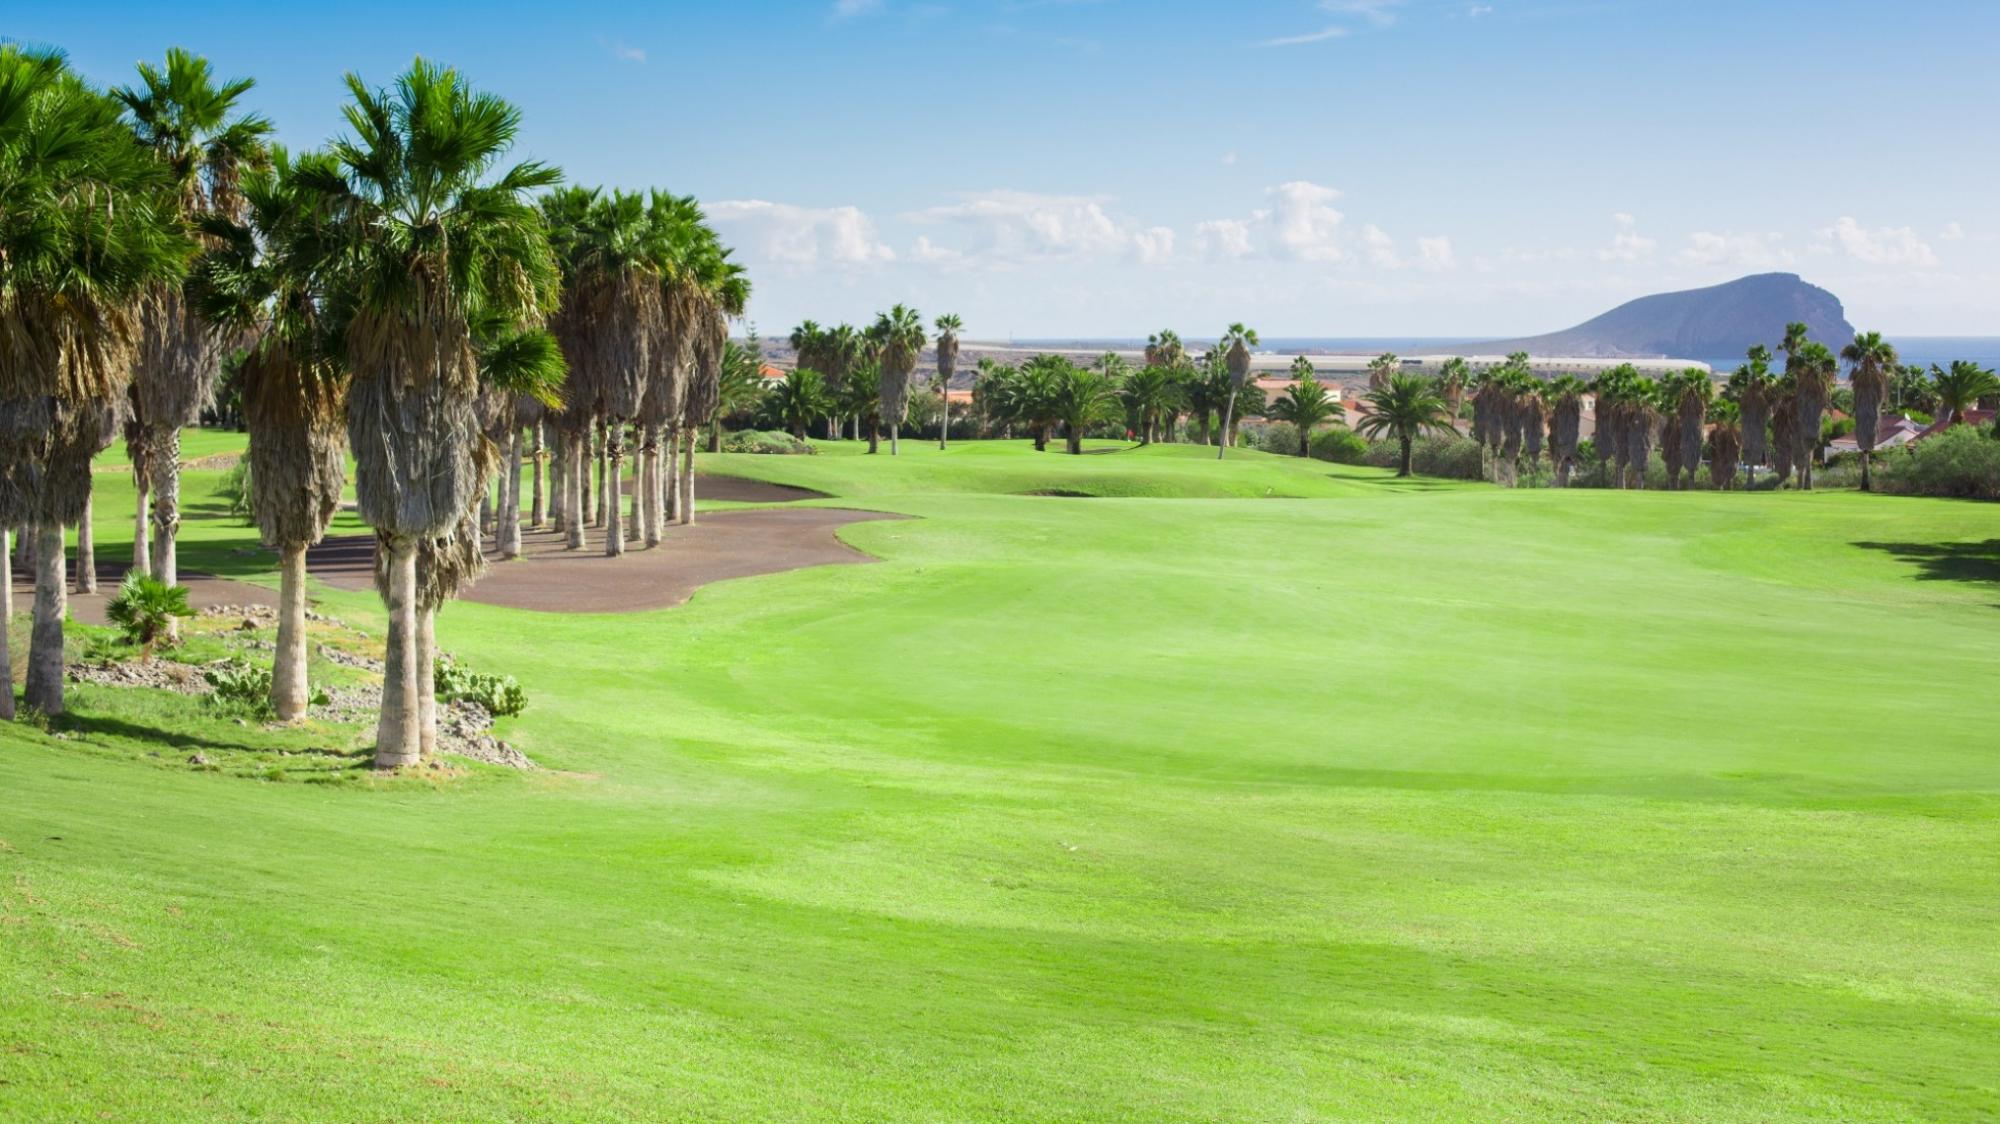 The Golf del Sur's lovely golf course situated in staggering Tenerife.